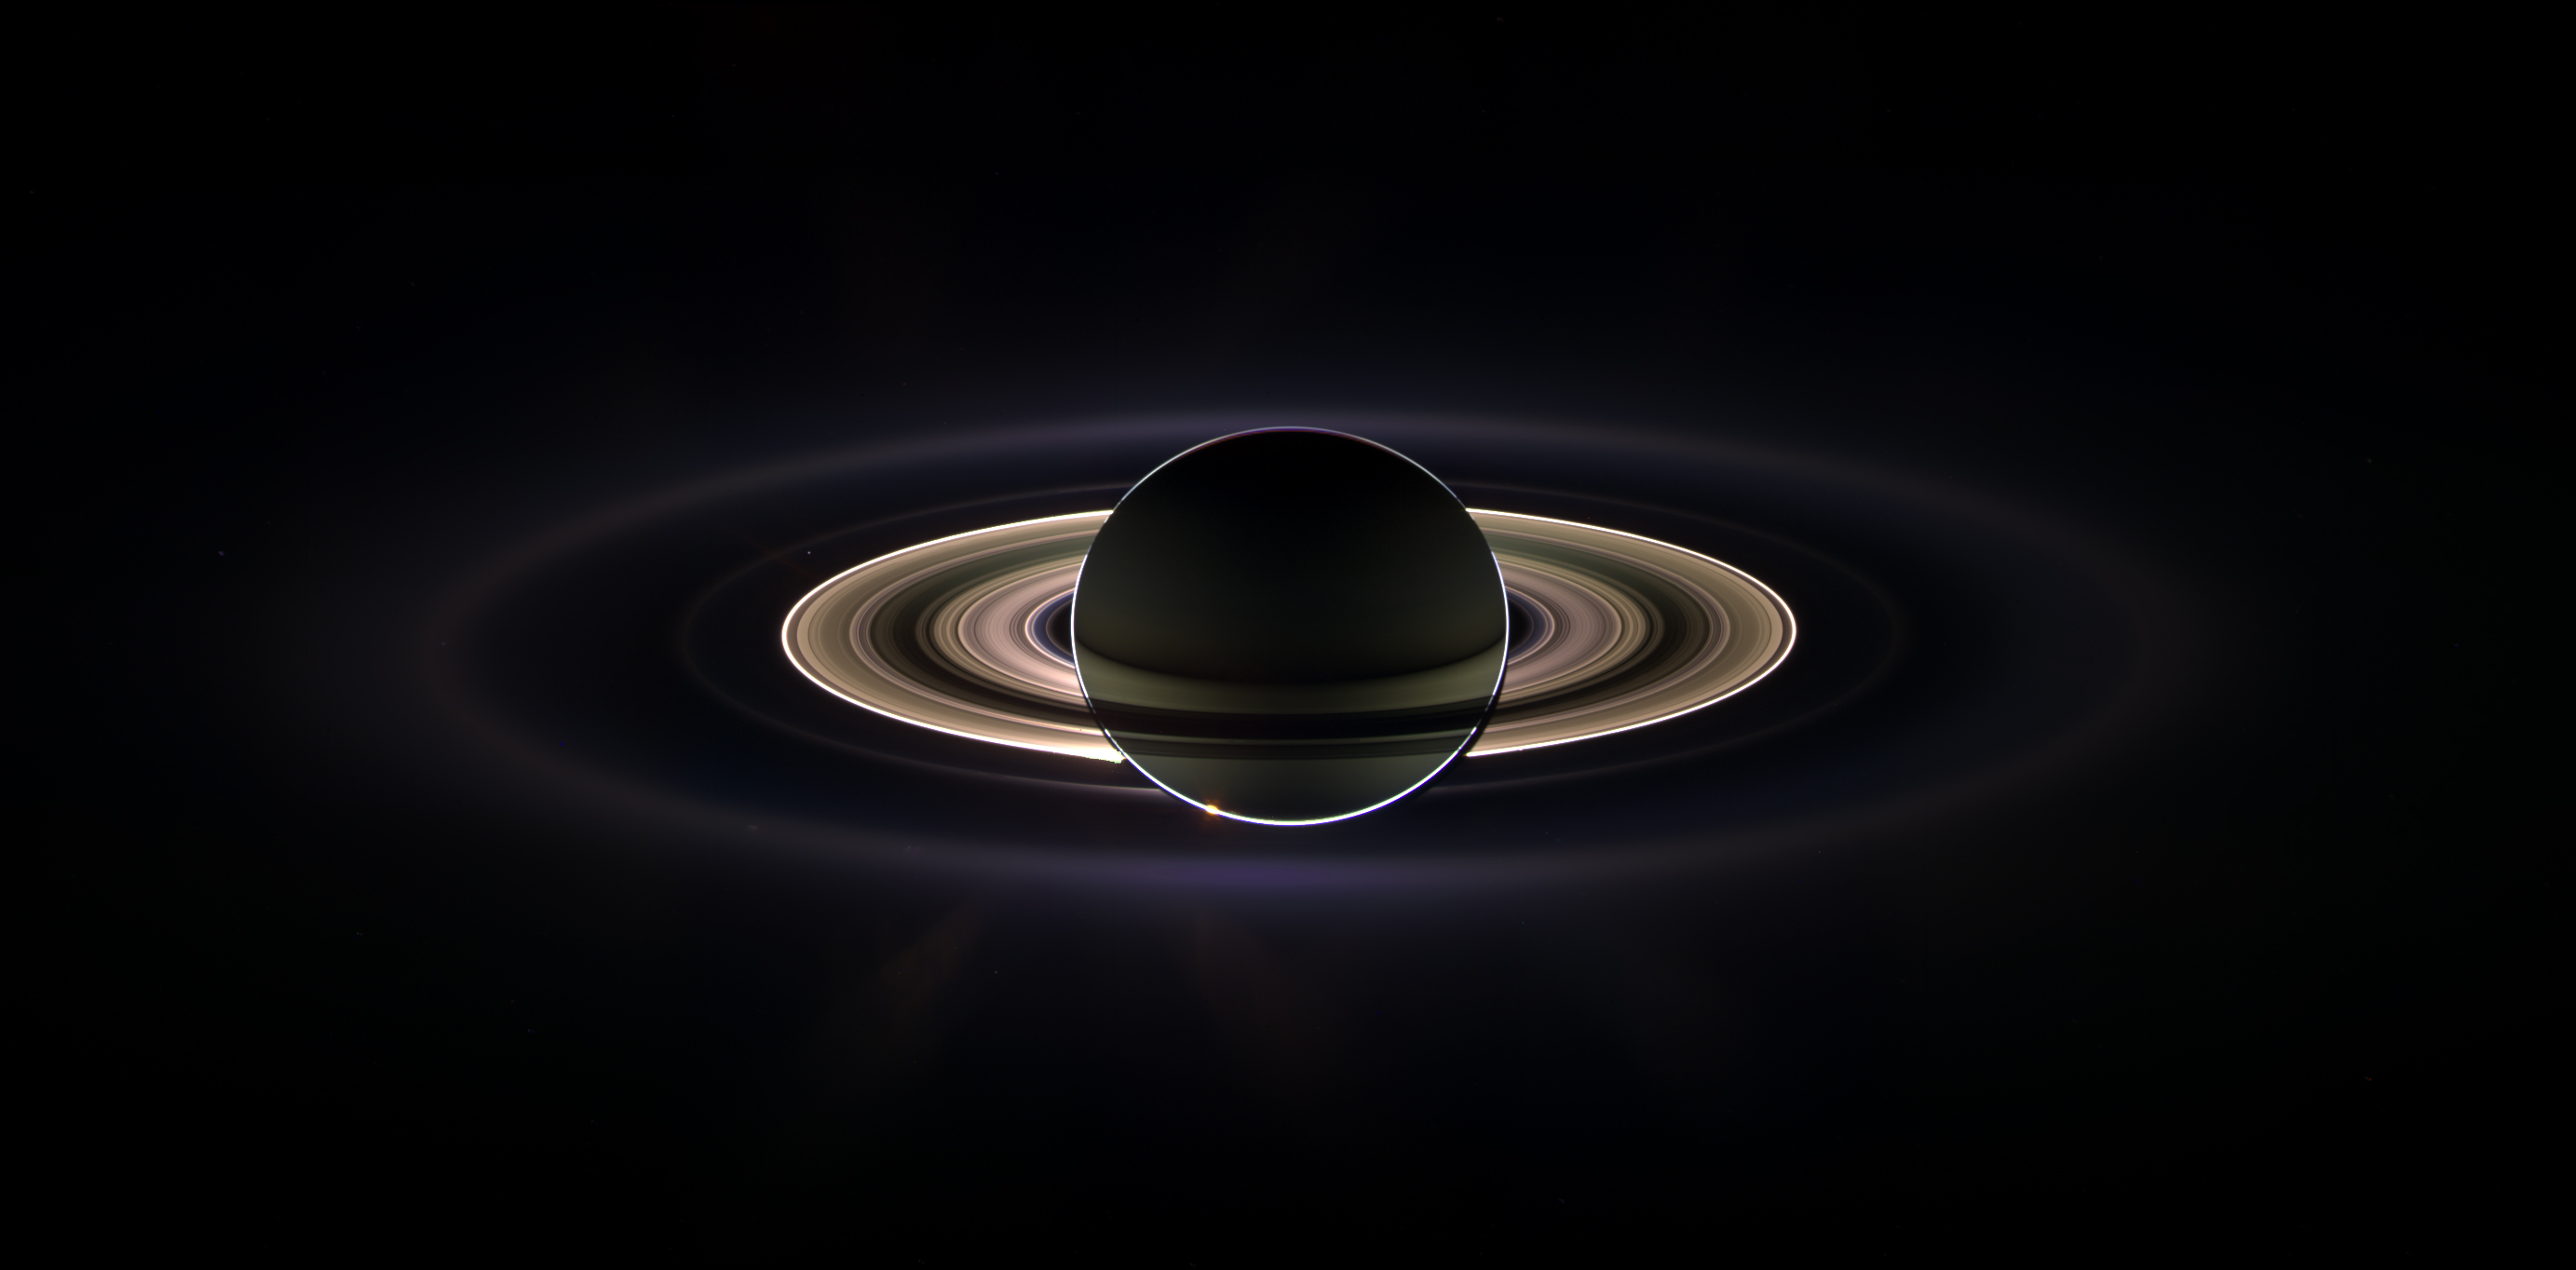 Eclipse of Saturn, as seen by Cassini.